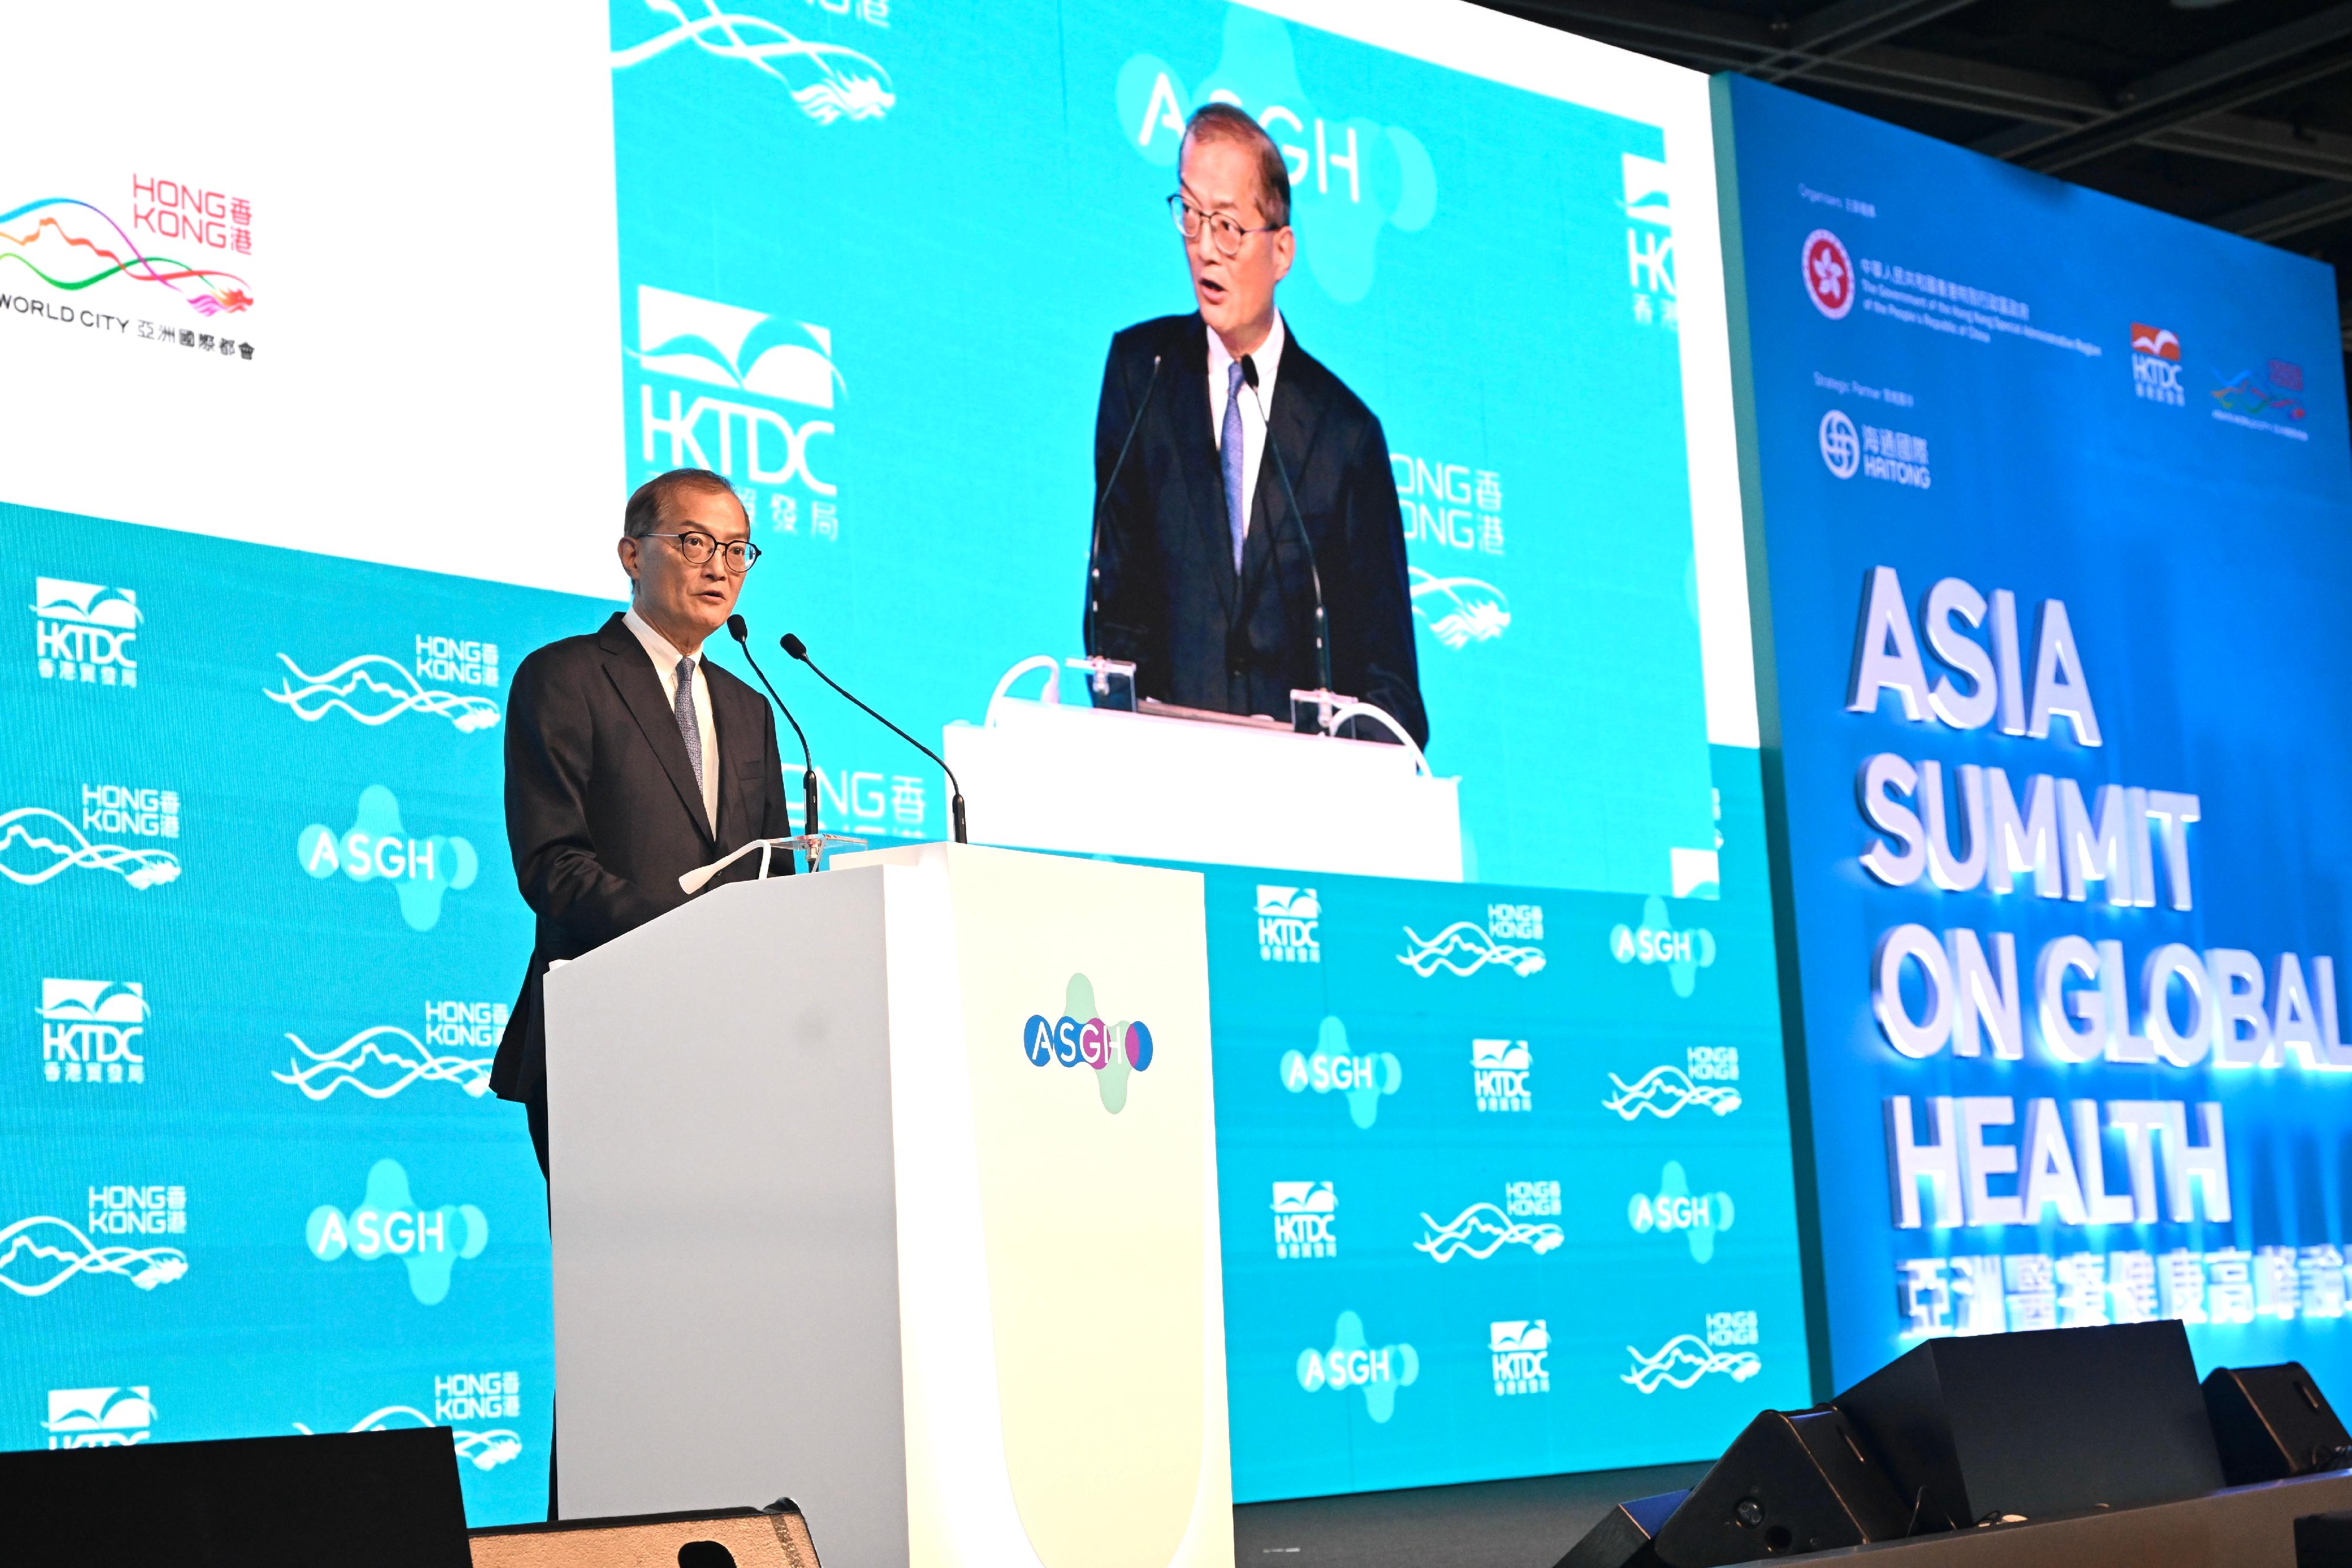 The Secretary for Health, Professor Lo Chung-mau, delivers a speech at the "Plenary Session: Reimagining the Future of Healthcare" of the Asia Summit on Global Health today (May 17).